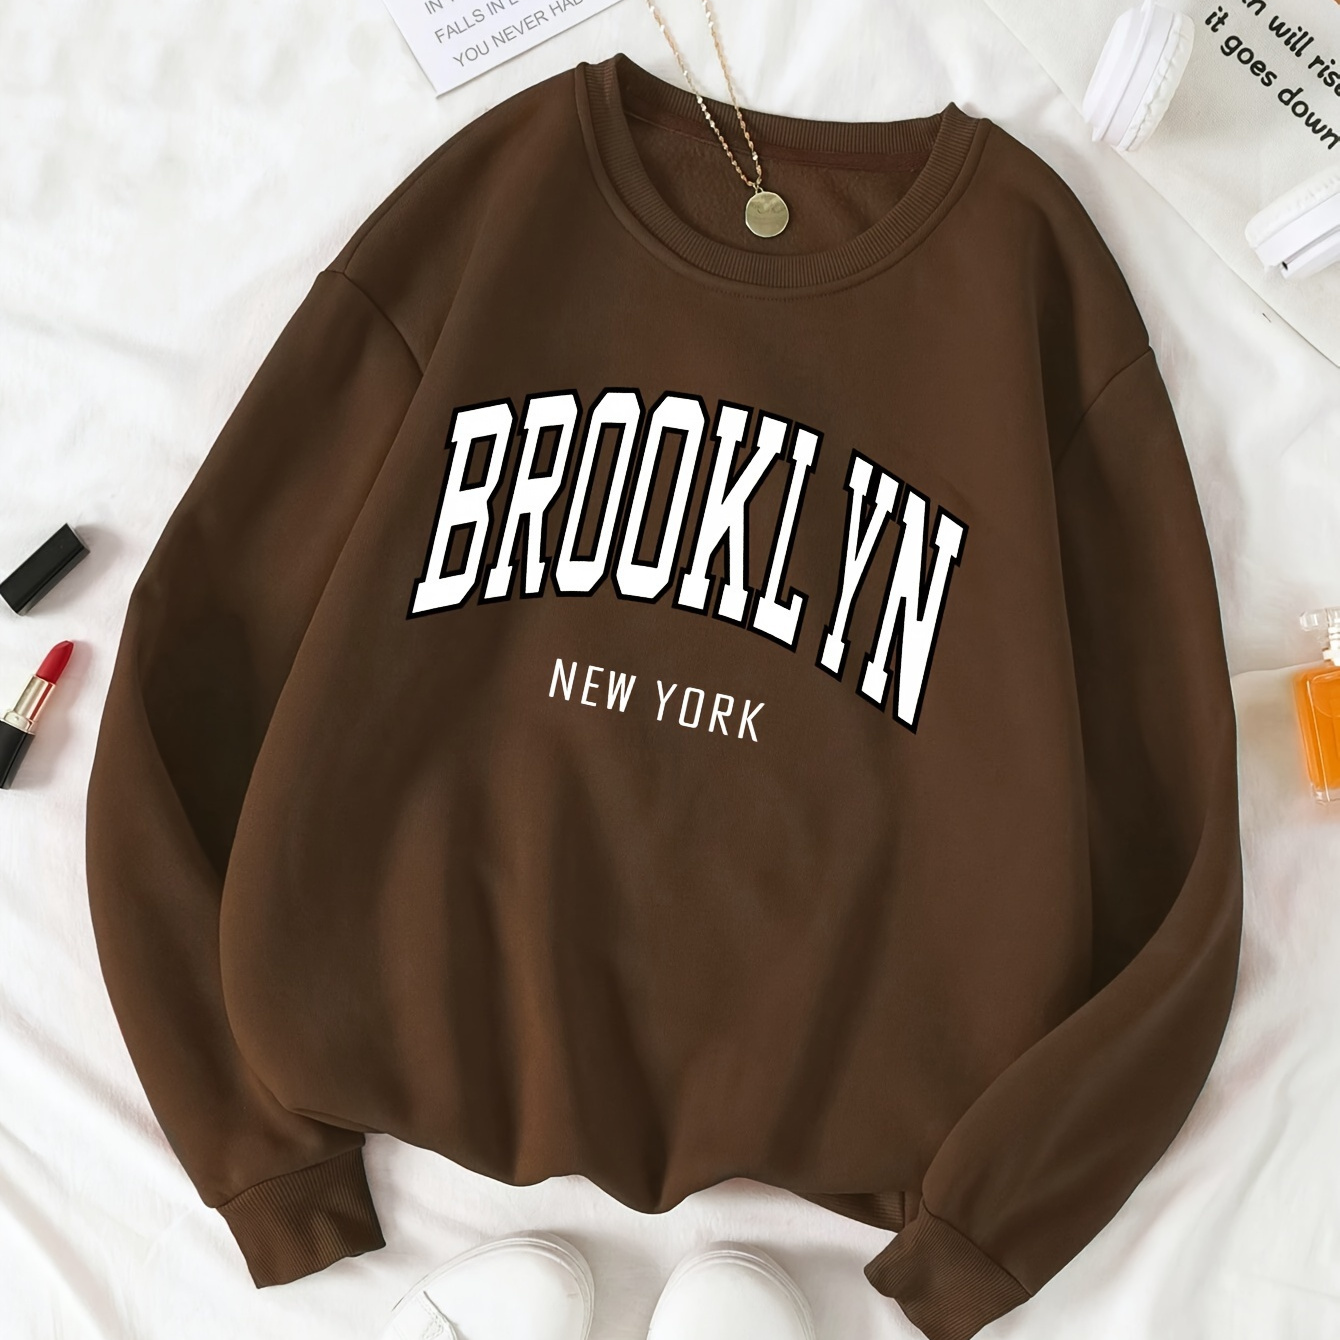 

Casual Pullover Sweatshirt With Letter Print, Crew Neck, Long Sleeve, Relaxed Fit - Comfortable Loungewear For Fall Winter